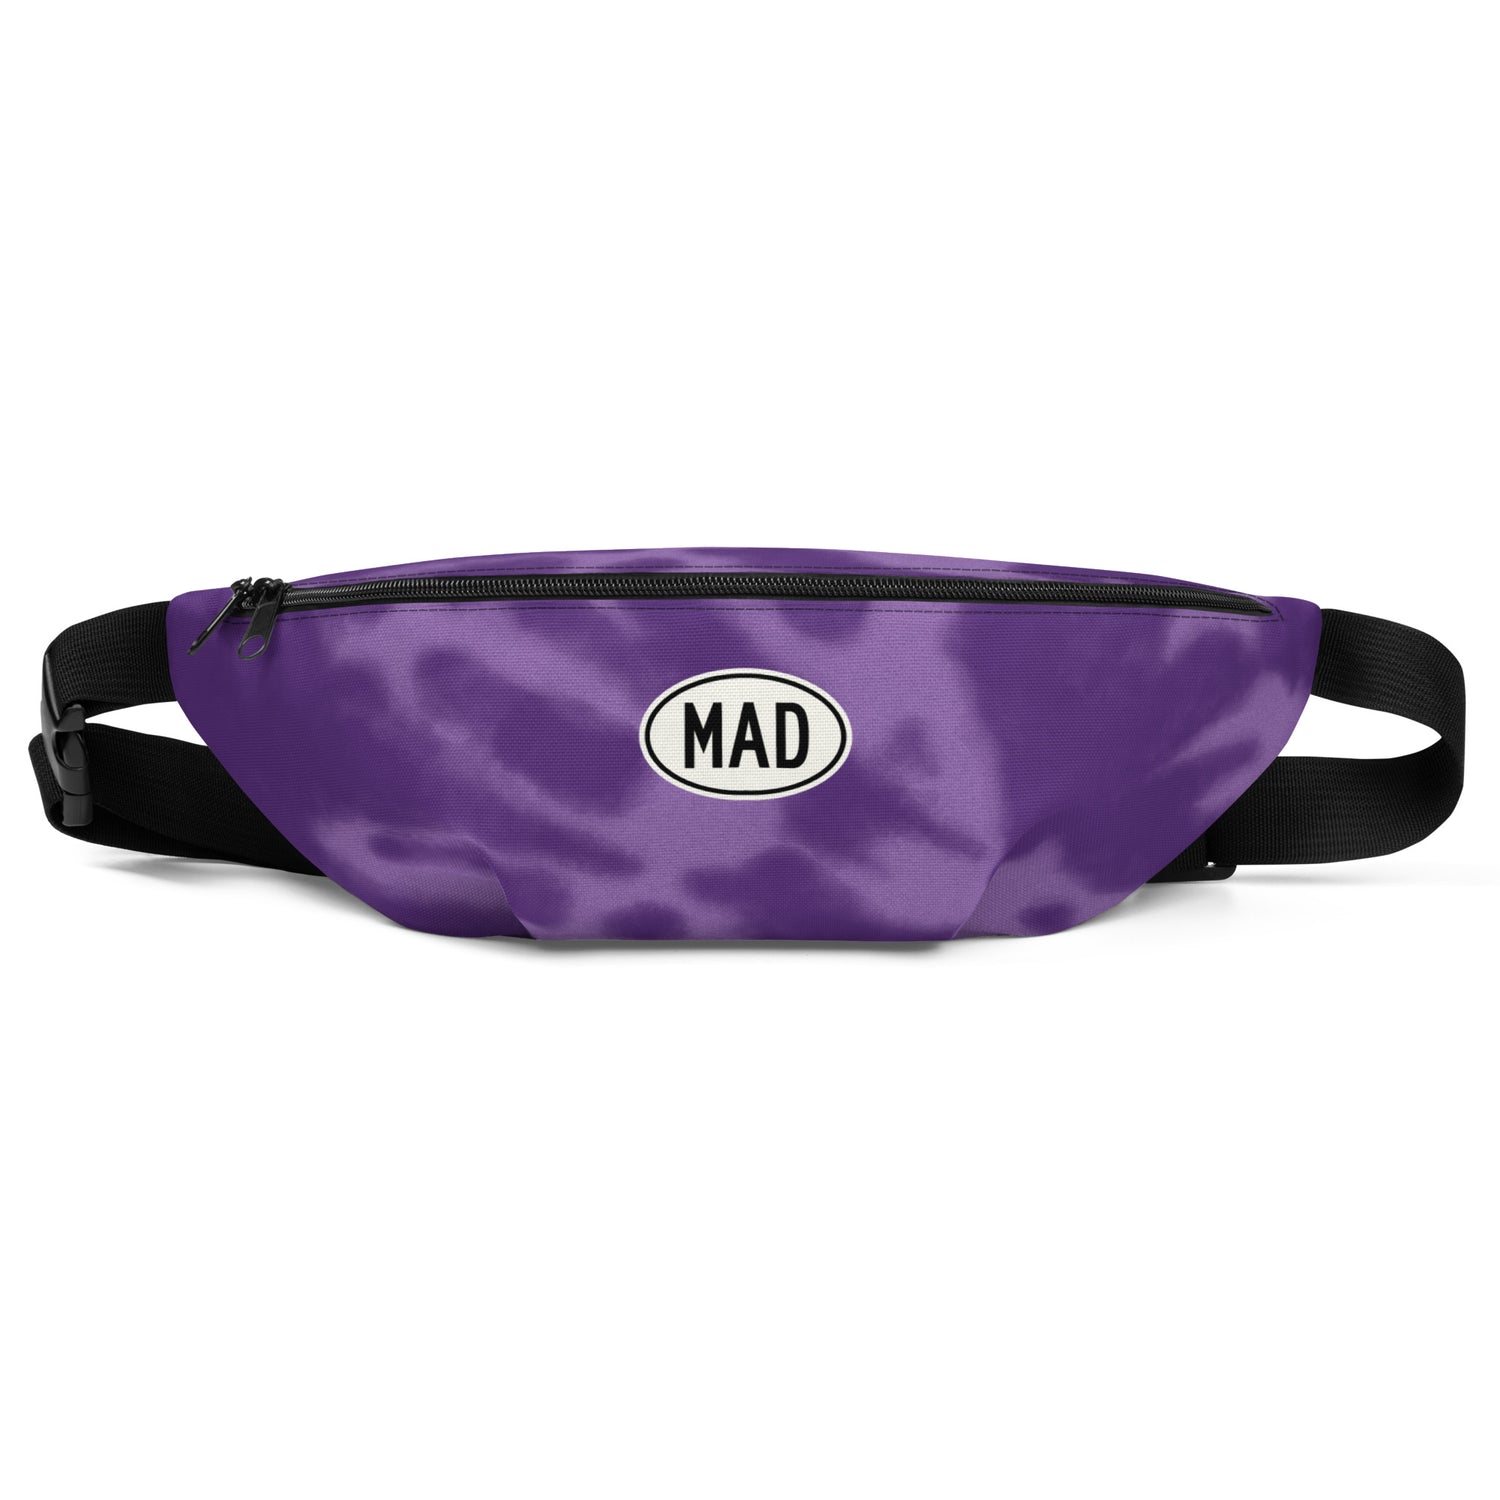 Madrid Spain Backpacks, Fanny Packs and Tote Bags • MAD Airport Code